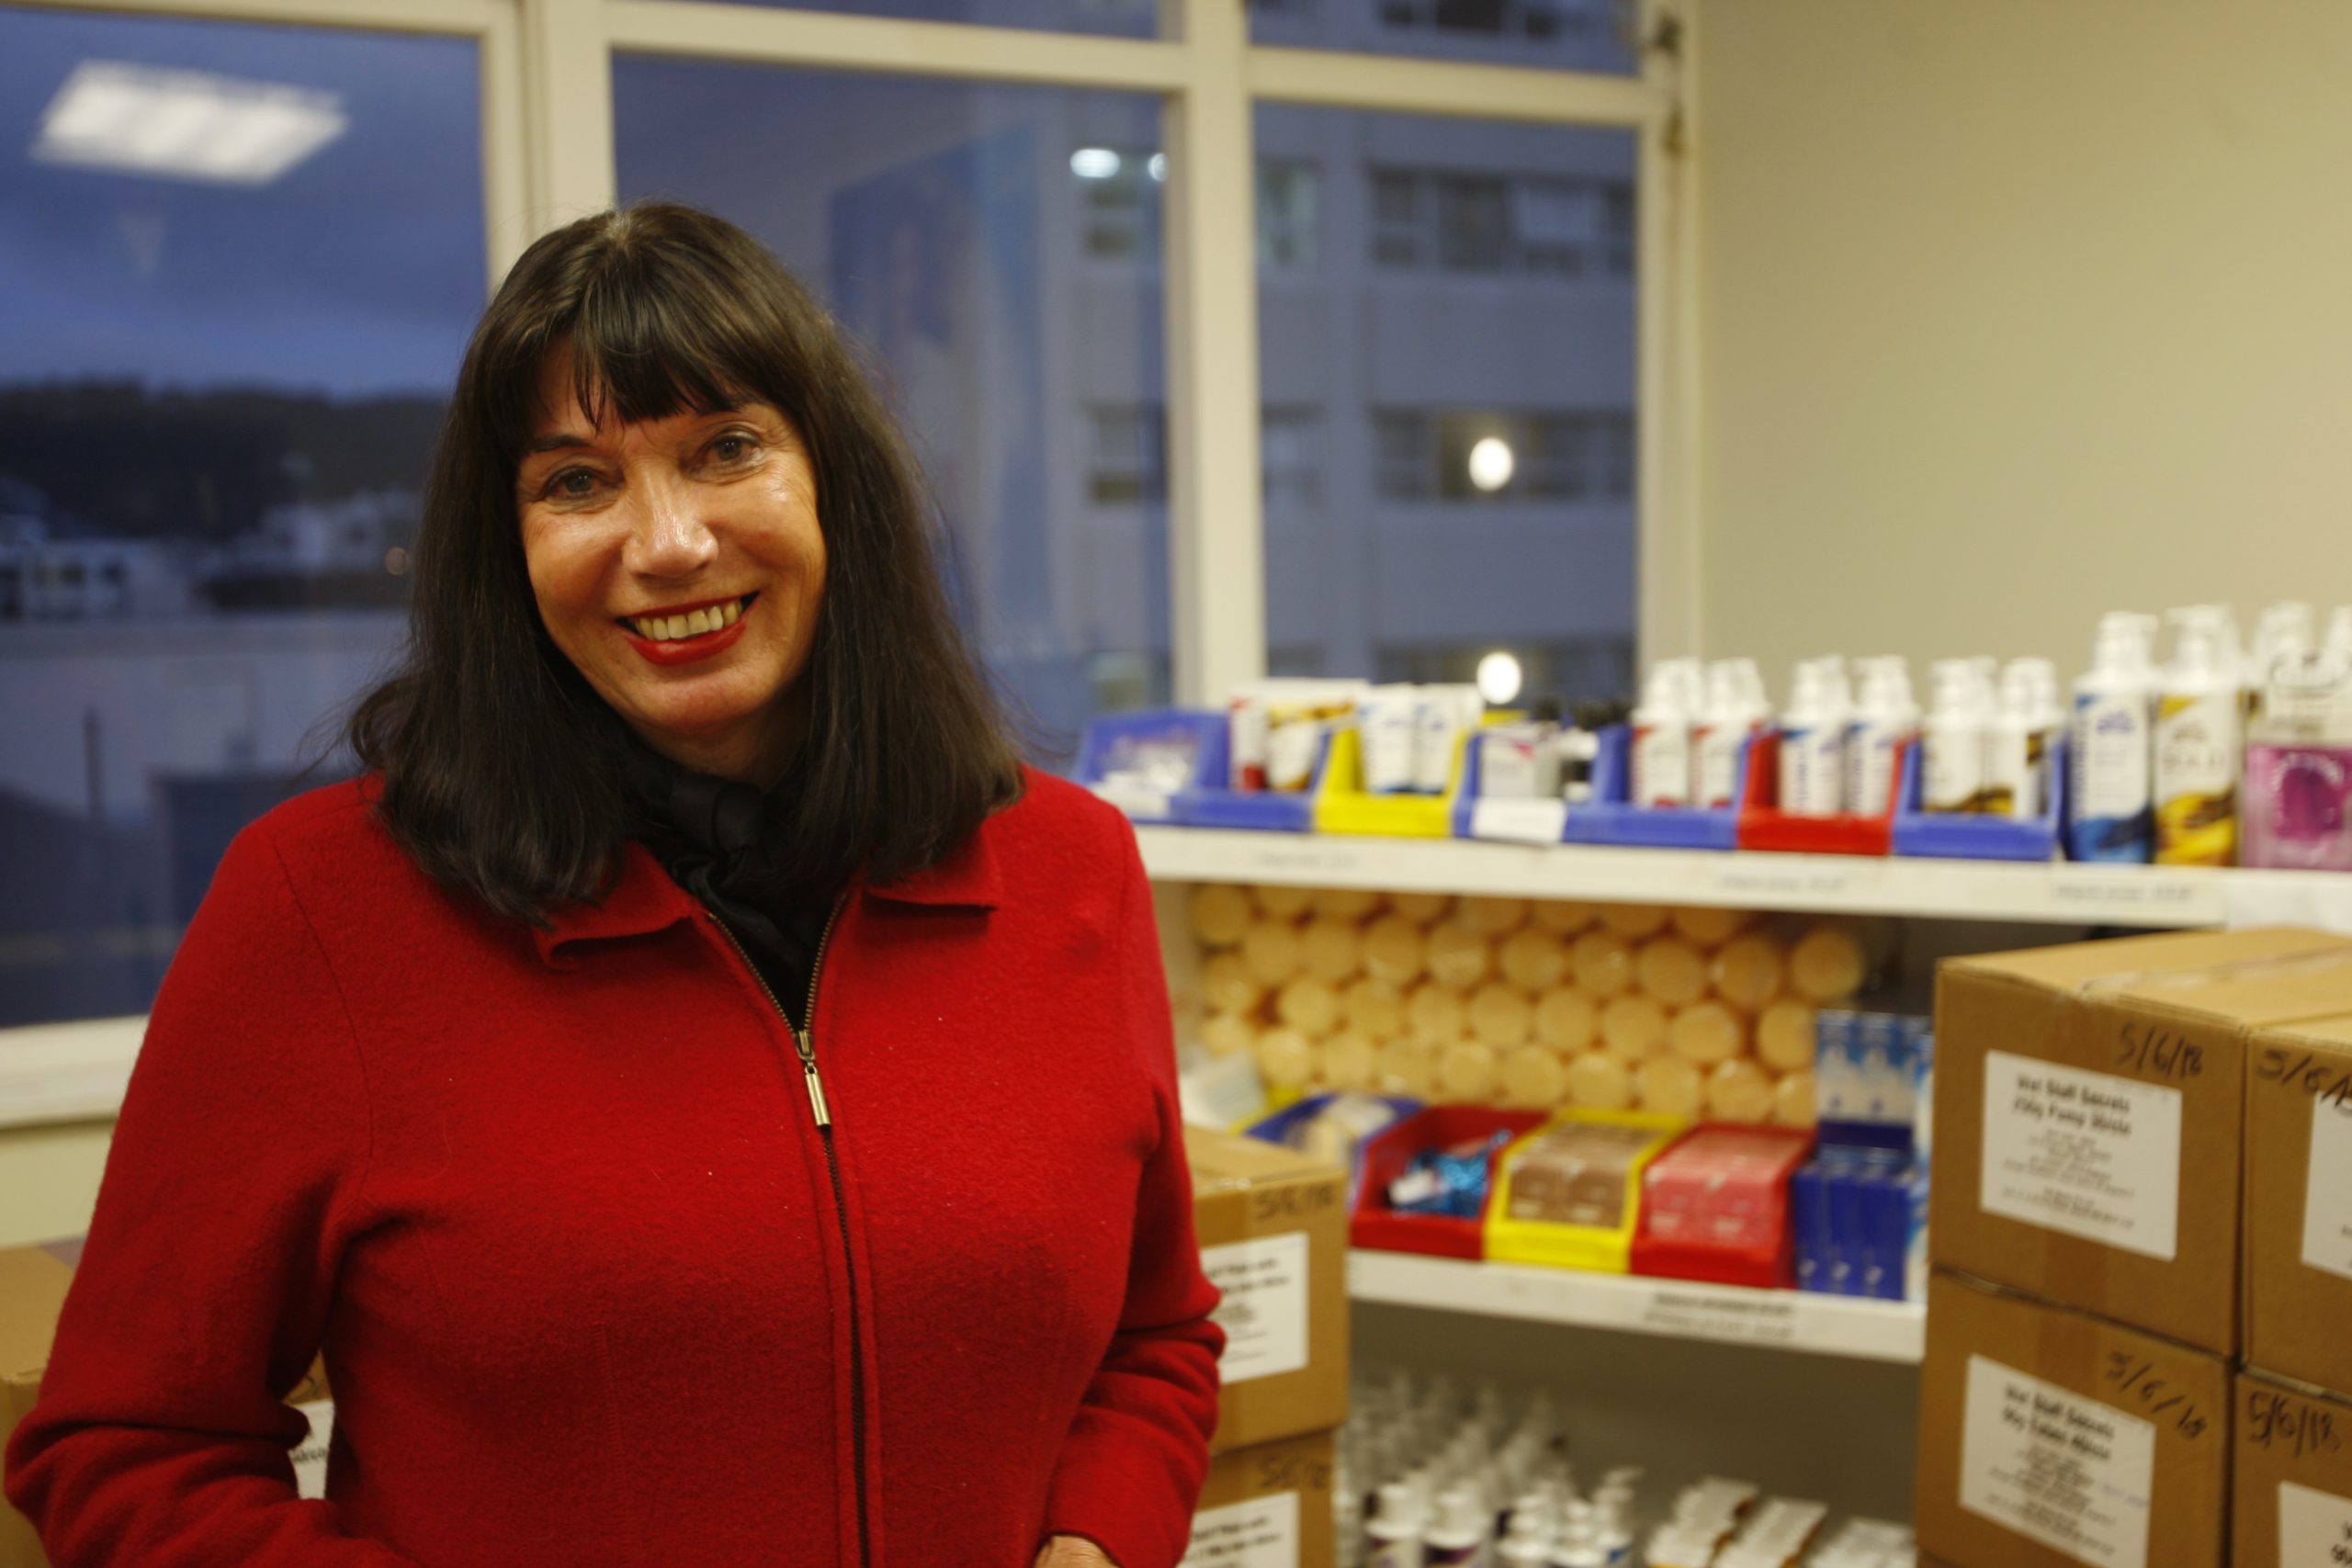 Catherine Healy, the national coordinator of the New Zealand Prostitutes' Collective, stands in front of supplies at the collective's office in Wellington, New Zealand.